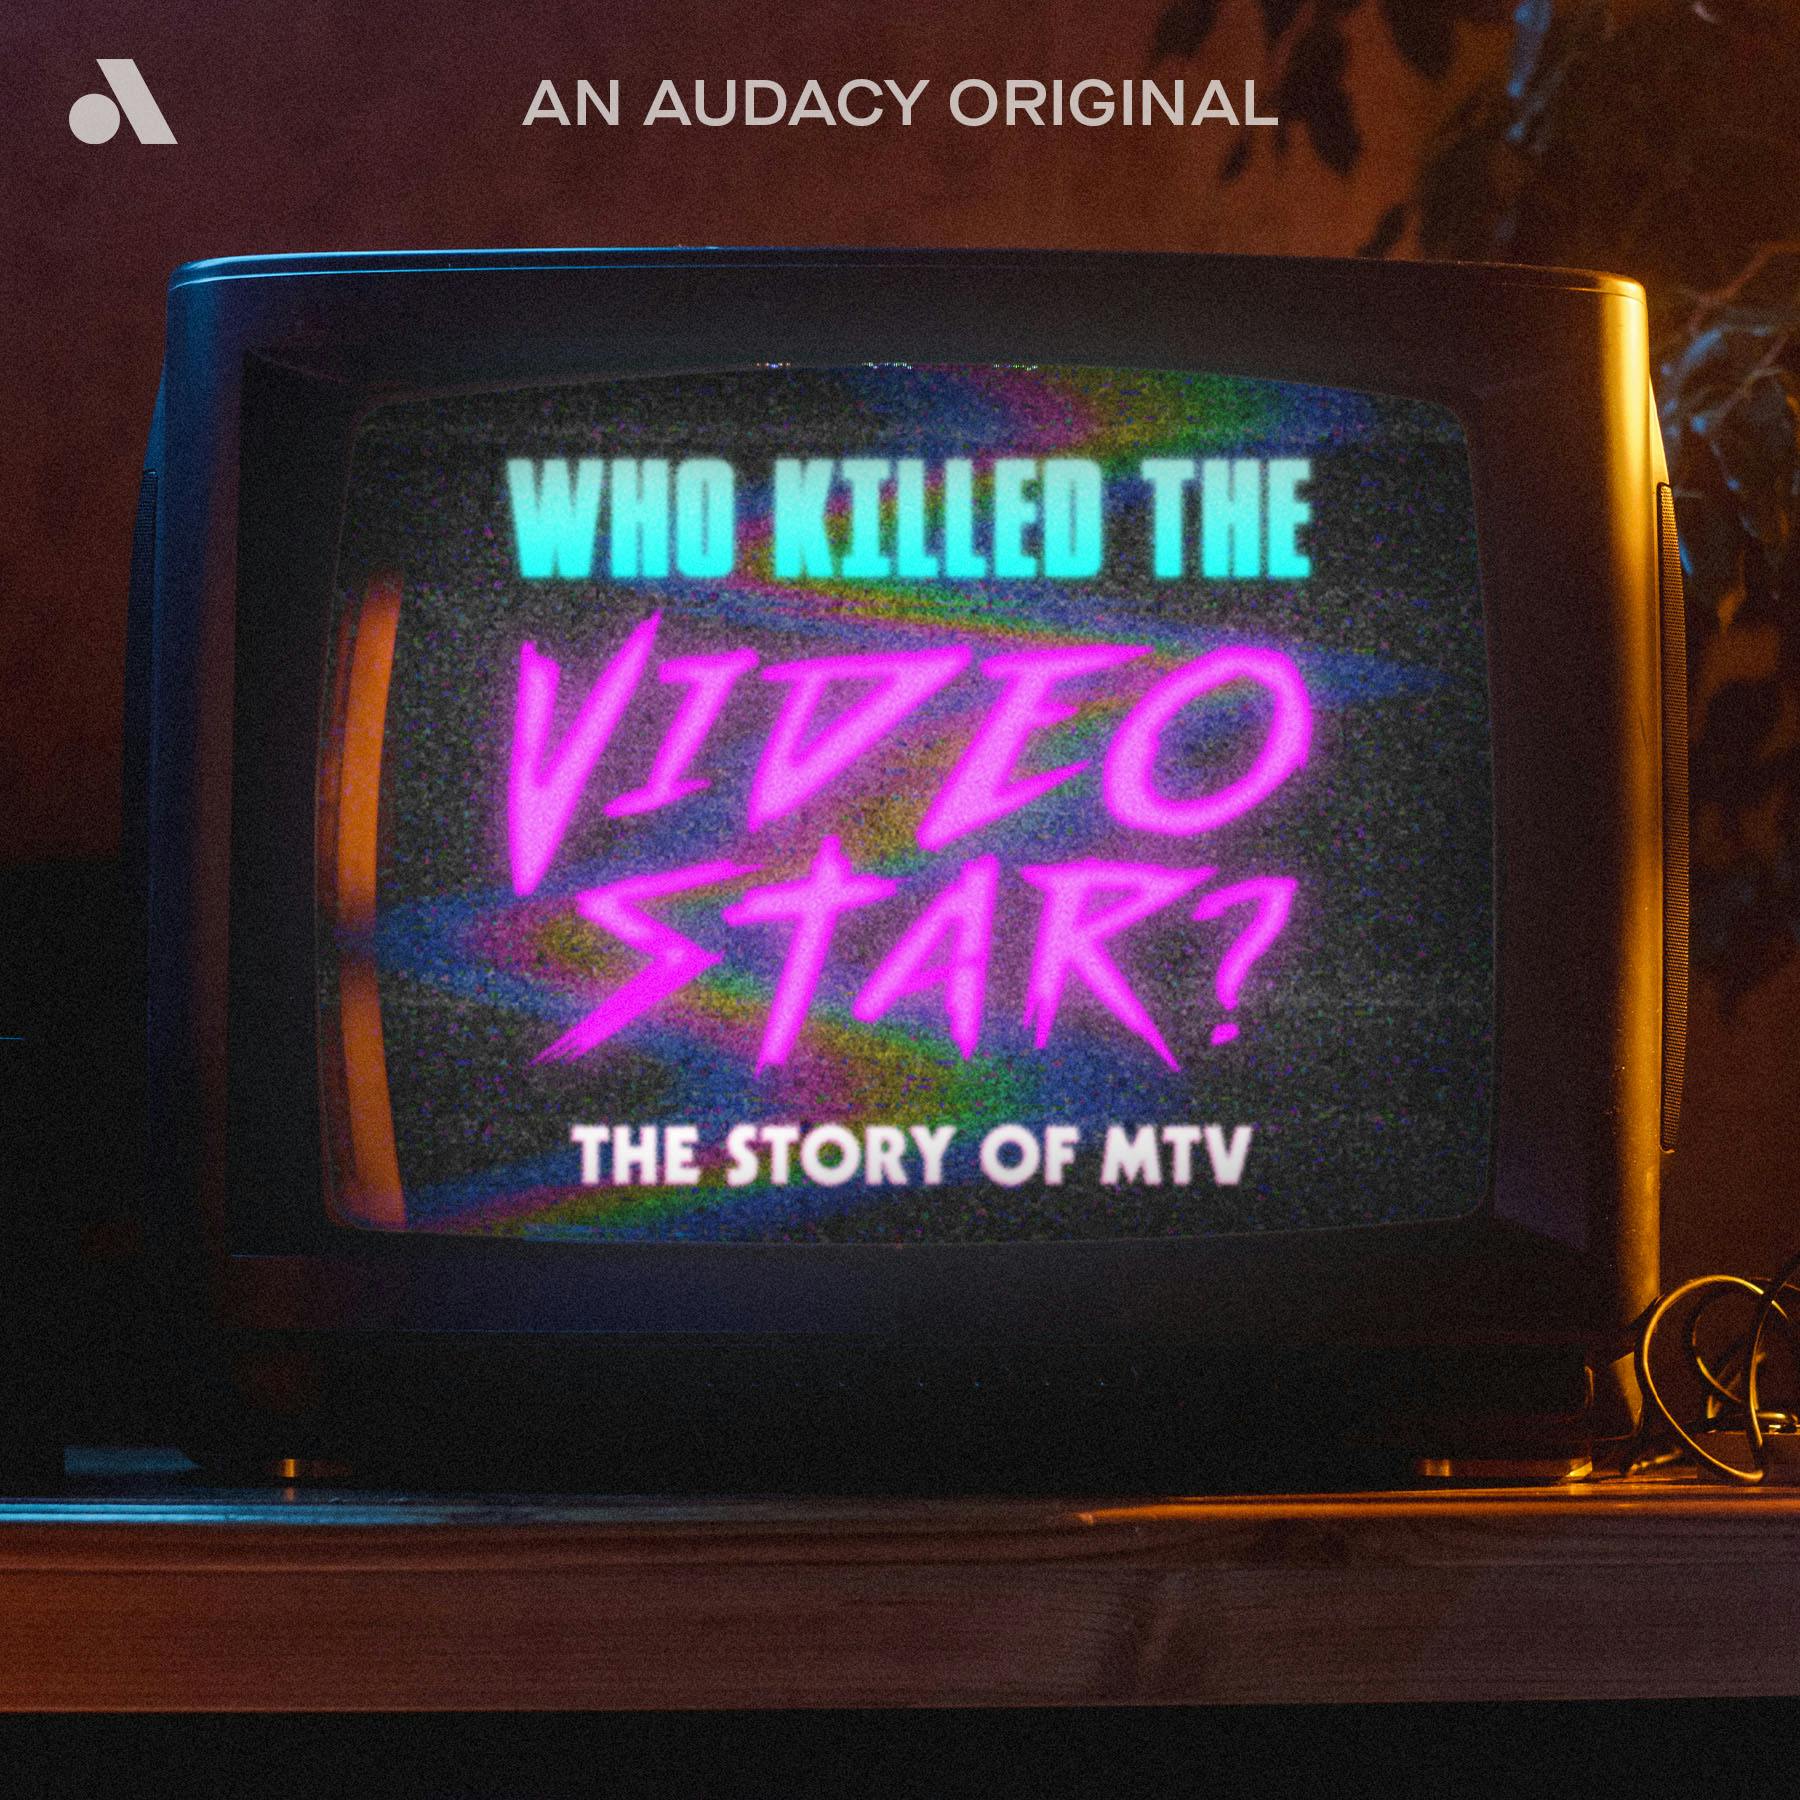 Who Killed the Video Star: The Story of MTV | So Yesterday by Audacy Studios